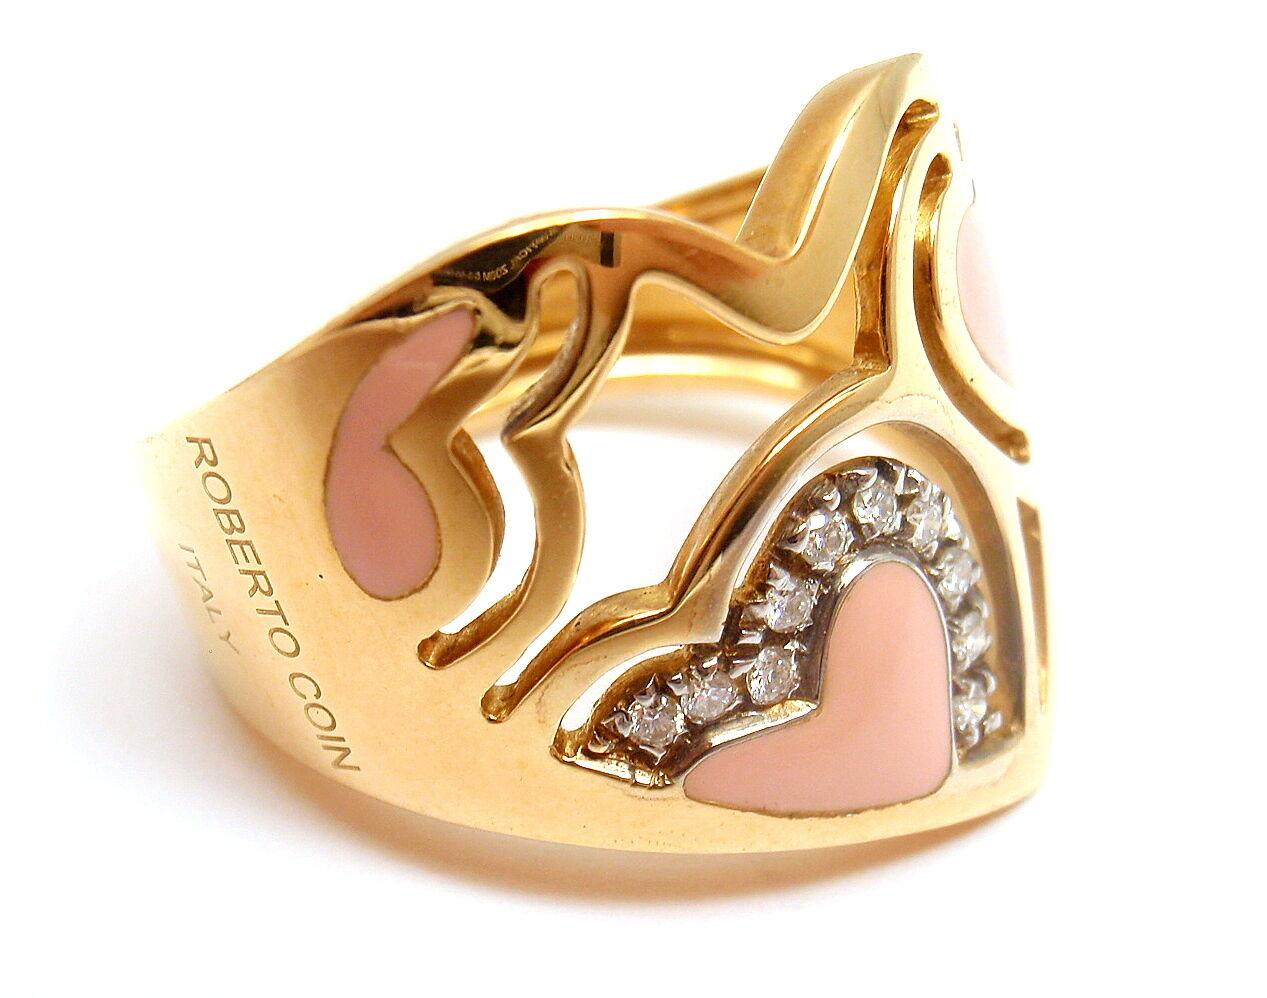 18k Yellow Gold Diamond & Pink Enamel Capri Ring by Roberto Coin. 
With 10 diamonds total weight approx. .10-.20ct GH/VS
Details:
Ring Size: 6.5
Weight: 9.9 grams
Width: 5-18mm
Stamped Hallmarks: Roberto Coin Italy 18k, plus one signature ruby
*Free